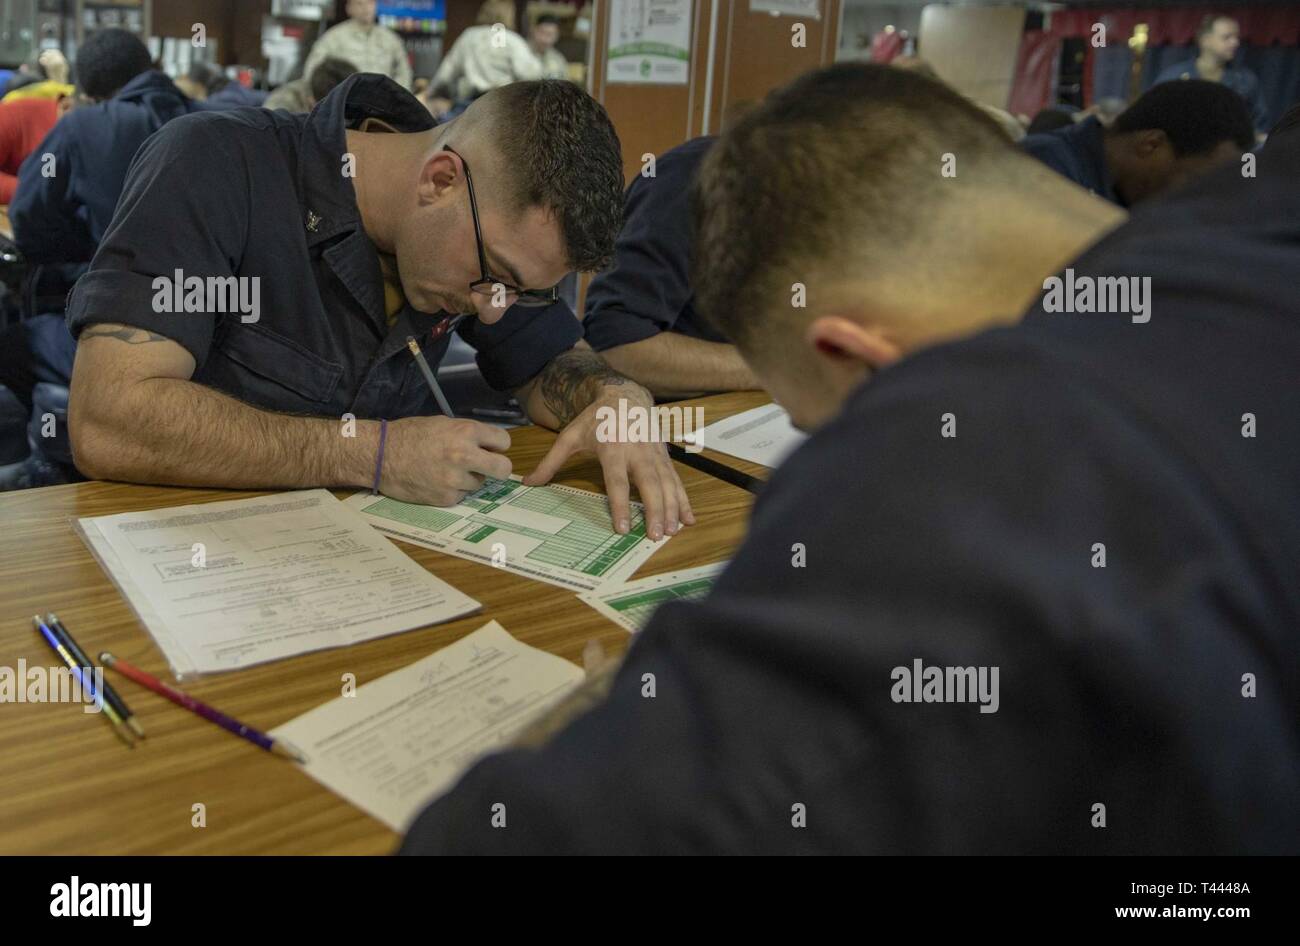 U.S. 5TH FLEET AREA OF OPERATIONS (March 14, 2019) Air Traffic Controlman 3rd Class Robert Wyker takes the Navywide petty officer second class advancement exam on the mess deck of the Wasp-class amphibious assault ship USS Kearsarge (LHD 3). Kearsarge is the flagship for the Kearsarge Amphibious Ready Group and, with the embarked 22nd Marine Expeditionary Unit, is deployed to the U.S. 5th Fleet area of operations in support of naval operations to ensure maritime stability and security in the Central Region, connecting the Mediterranean and the Pacific through the western Indian Ocean and three Stock Photo